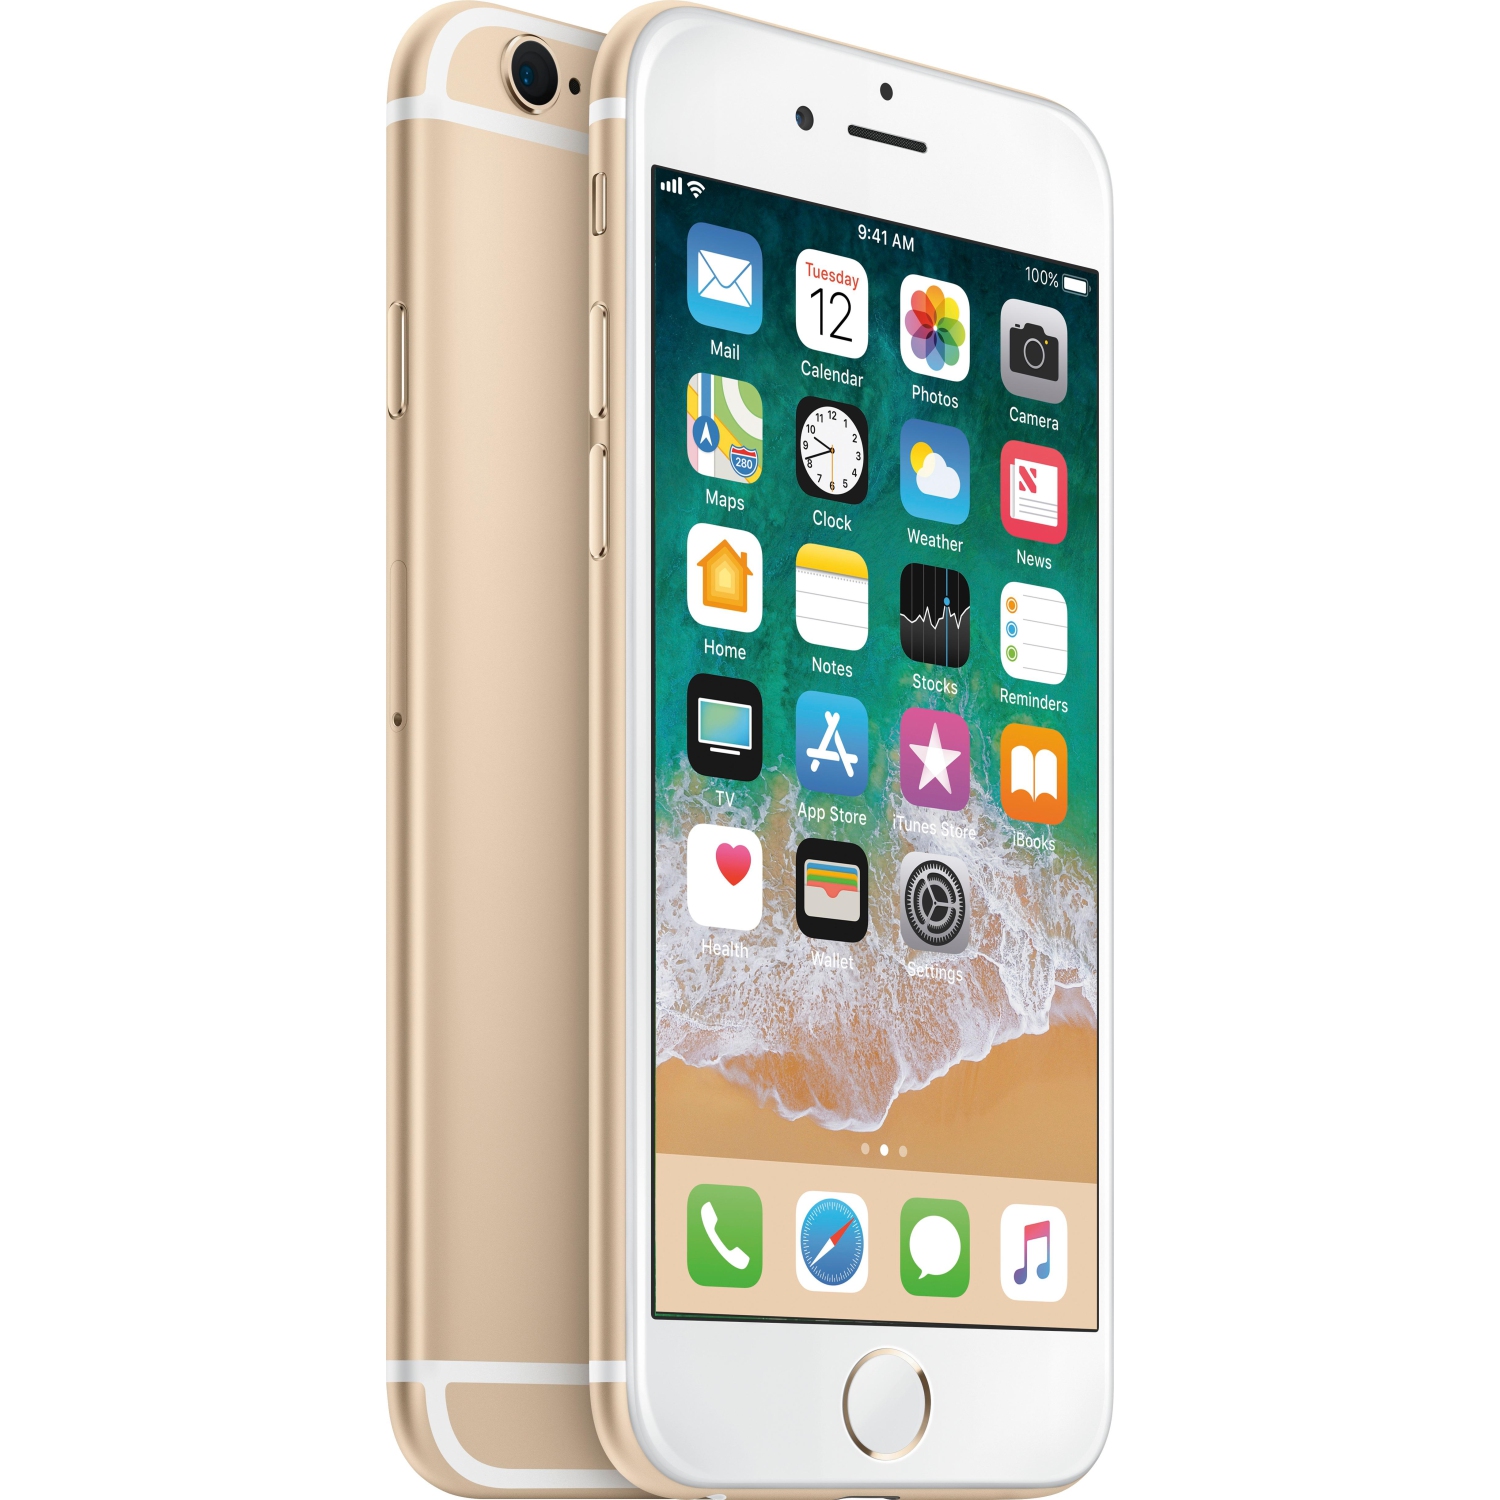 Apple iPhone 6s 128GB Smartphone - Gold - Unlocked - Manufacturer Certified Pre-Owned